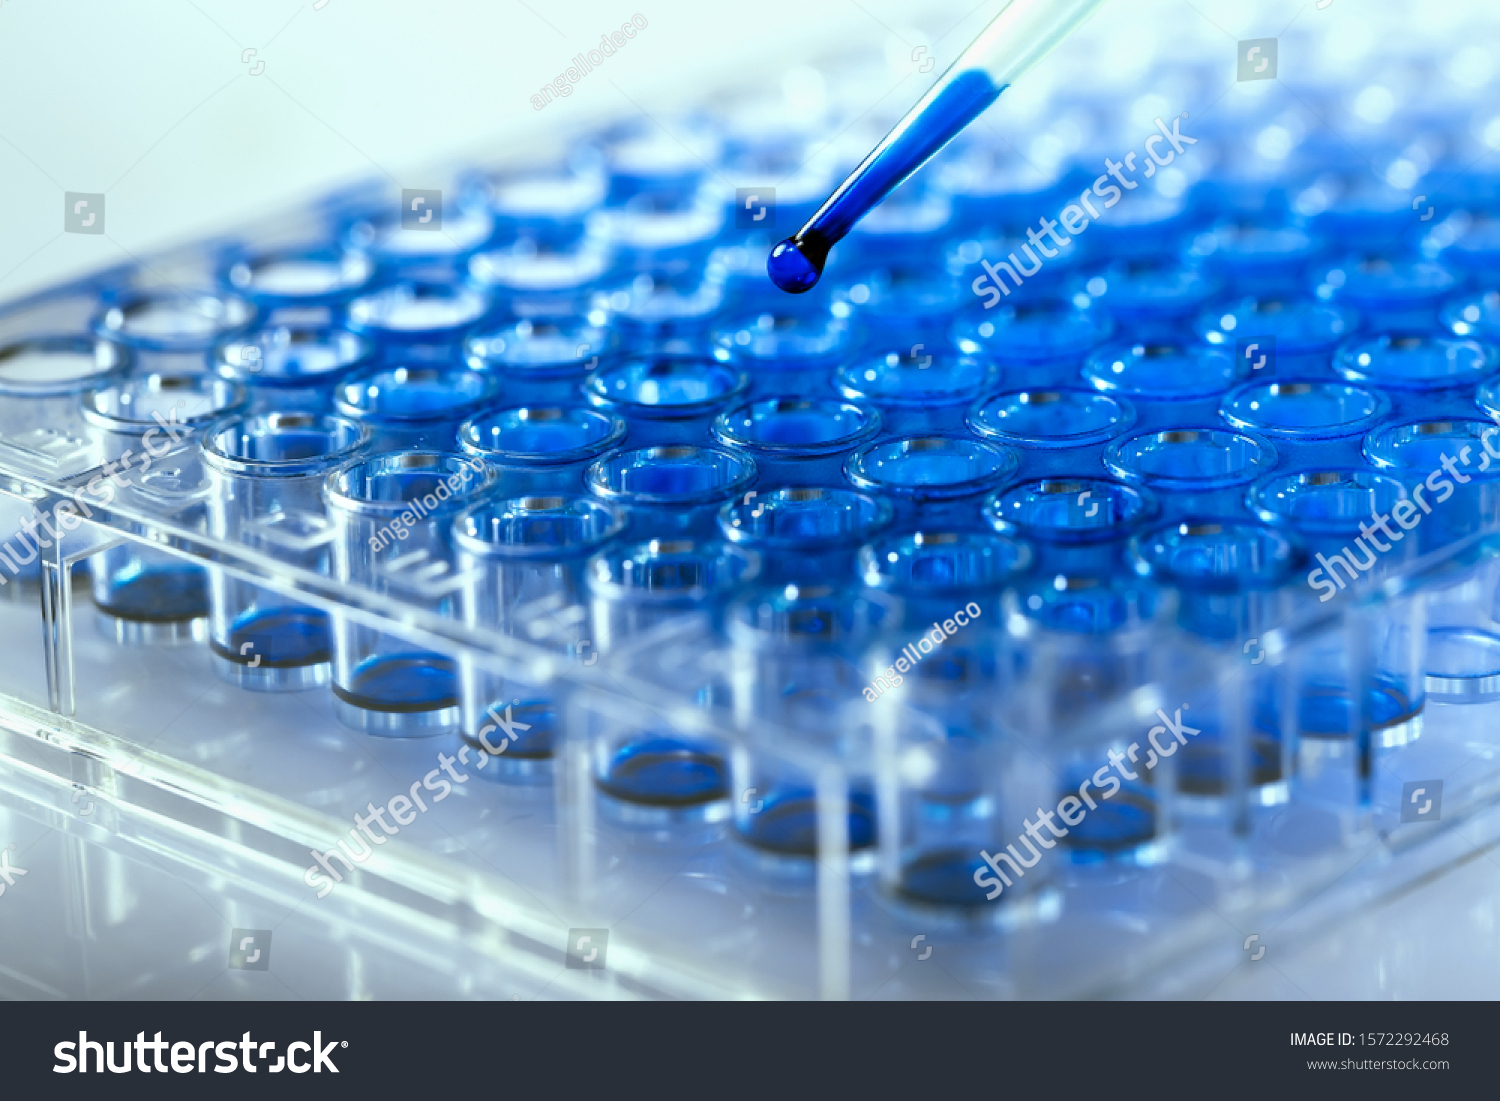 Scientist holding a 96 well plate with samples for biological analysis / Researcher pipetting samples of liquids in microplate for biomedical research #1572292468